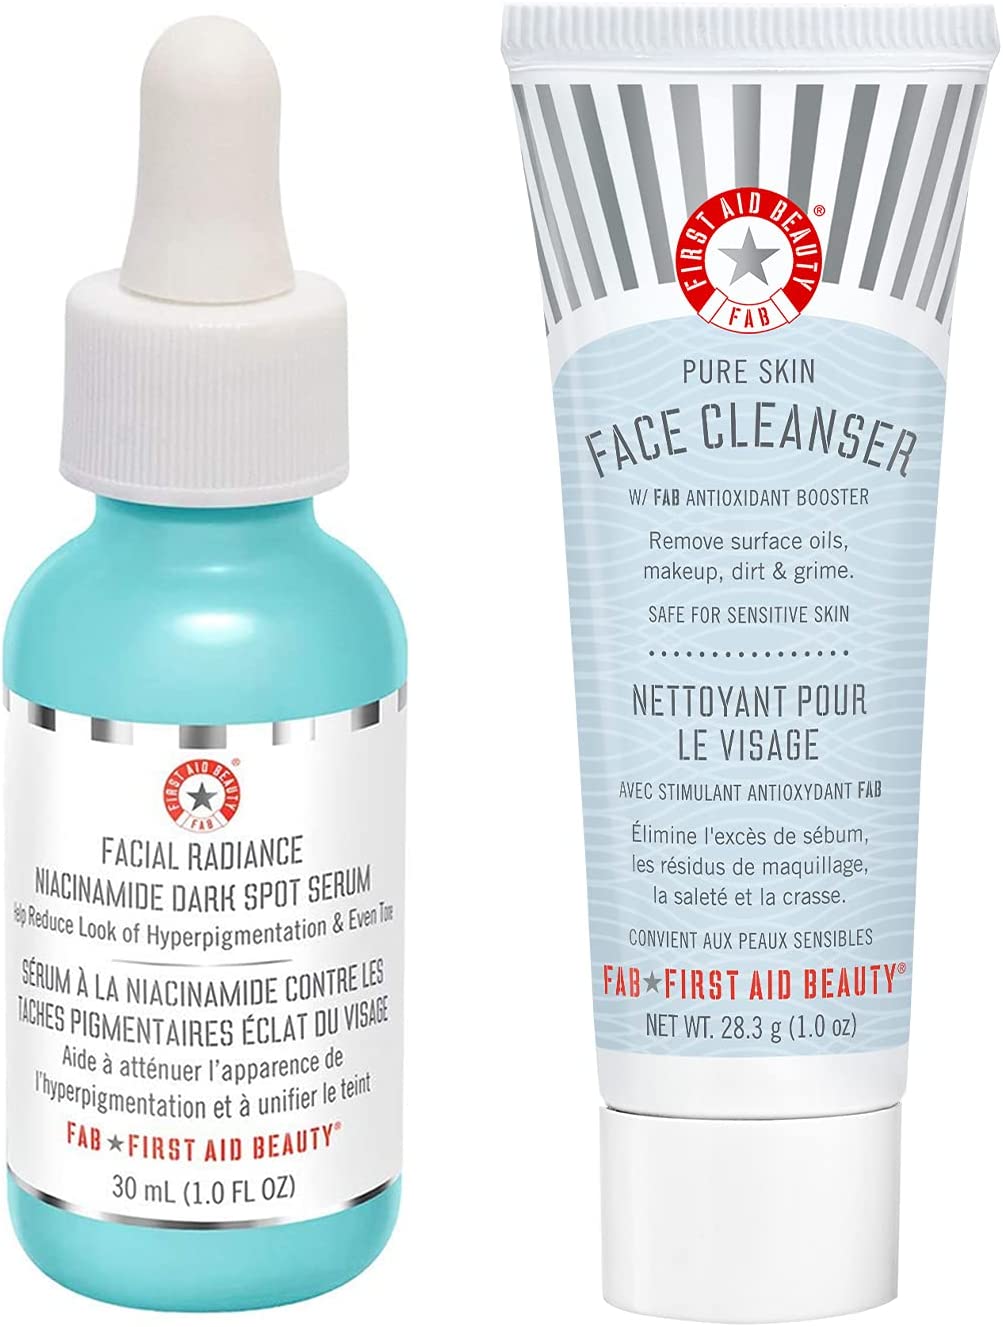 First Aid Beauty Bundle: Facial Radiance Niacinamide Dark Spot Serum – 1 fl oz.– and Deluxe Mini Pure Skin Face Cleanser – 1 oz.